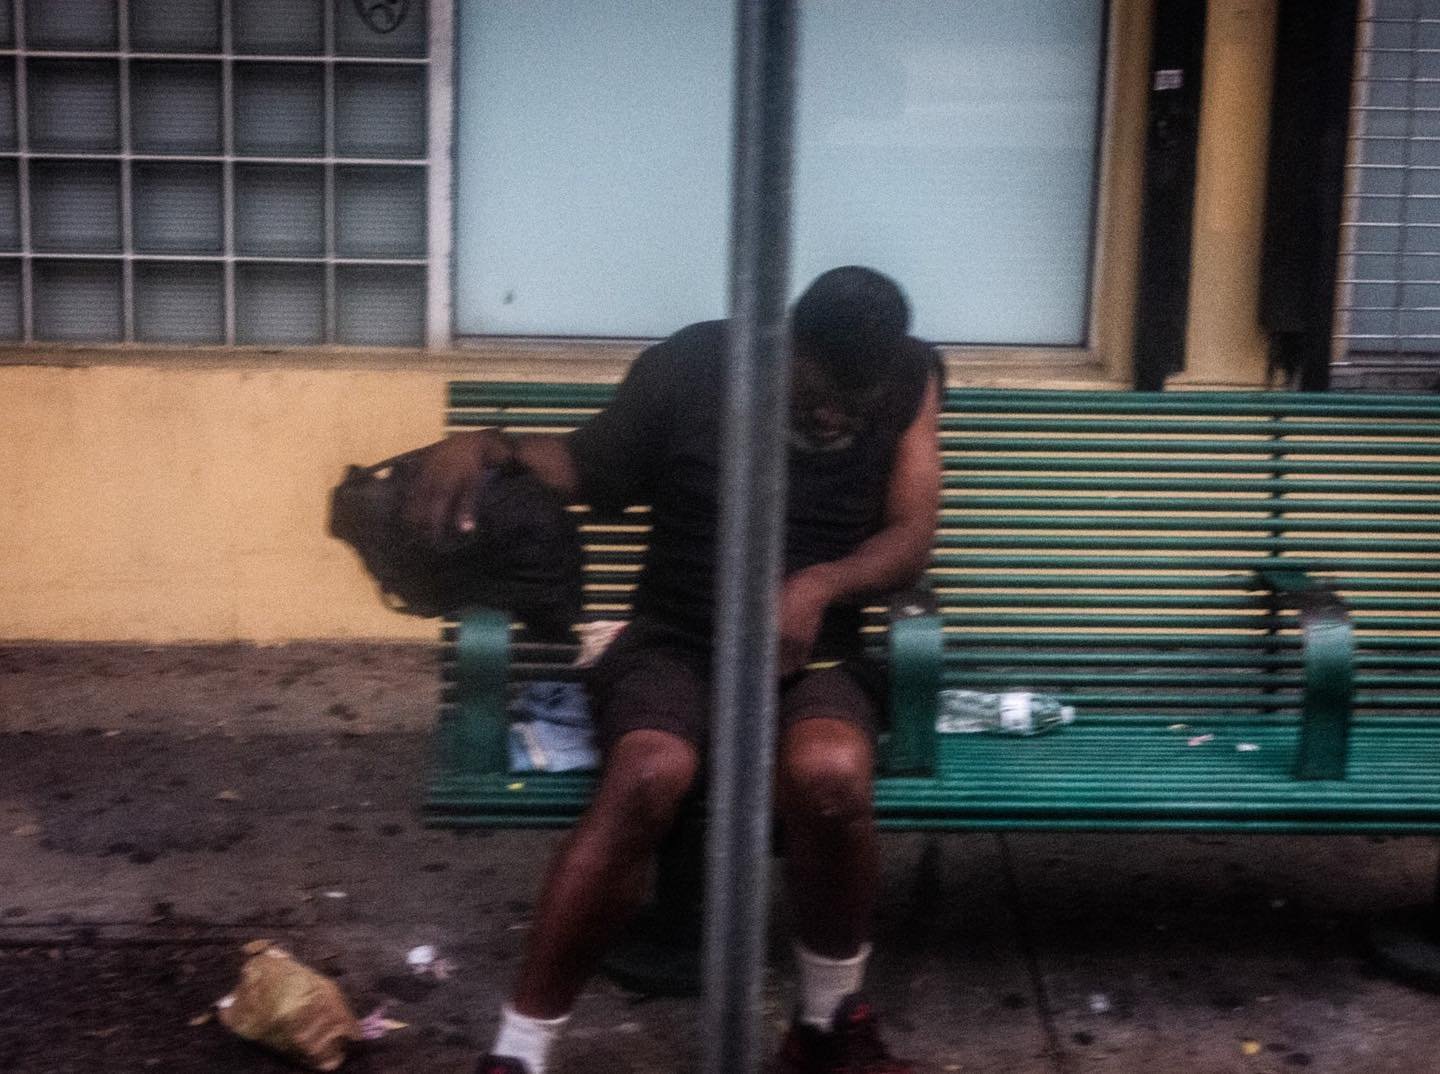 Homelessness. Miami, Florida. 2020.
.
The Buzz Project [2010-2024]
Is a monumental body of photographic work centered on the contemporary metropolis, the urban environment, and its infinite layers of reality and humanity. We have been carrying out th